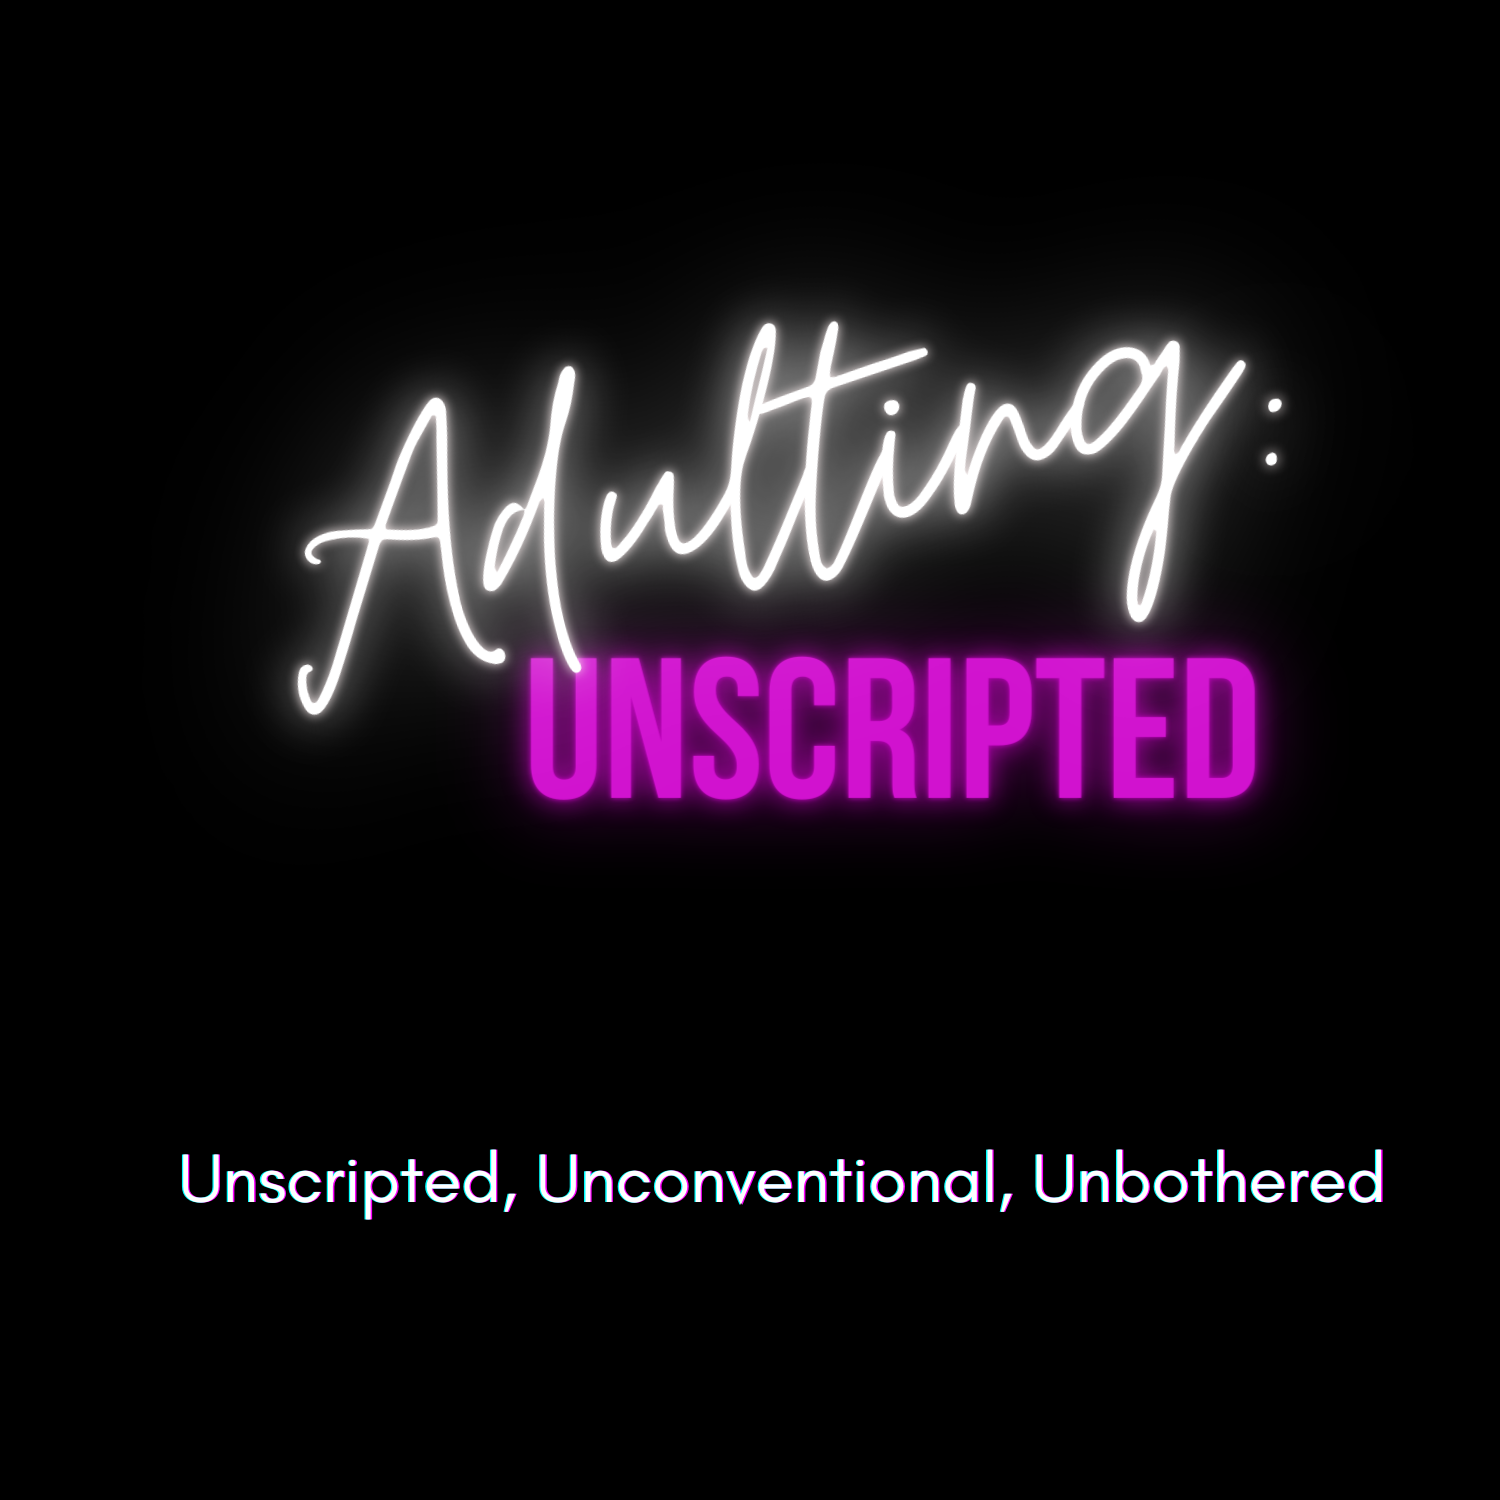 Adulting: Unscripted